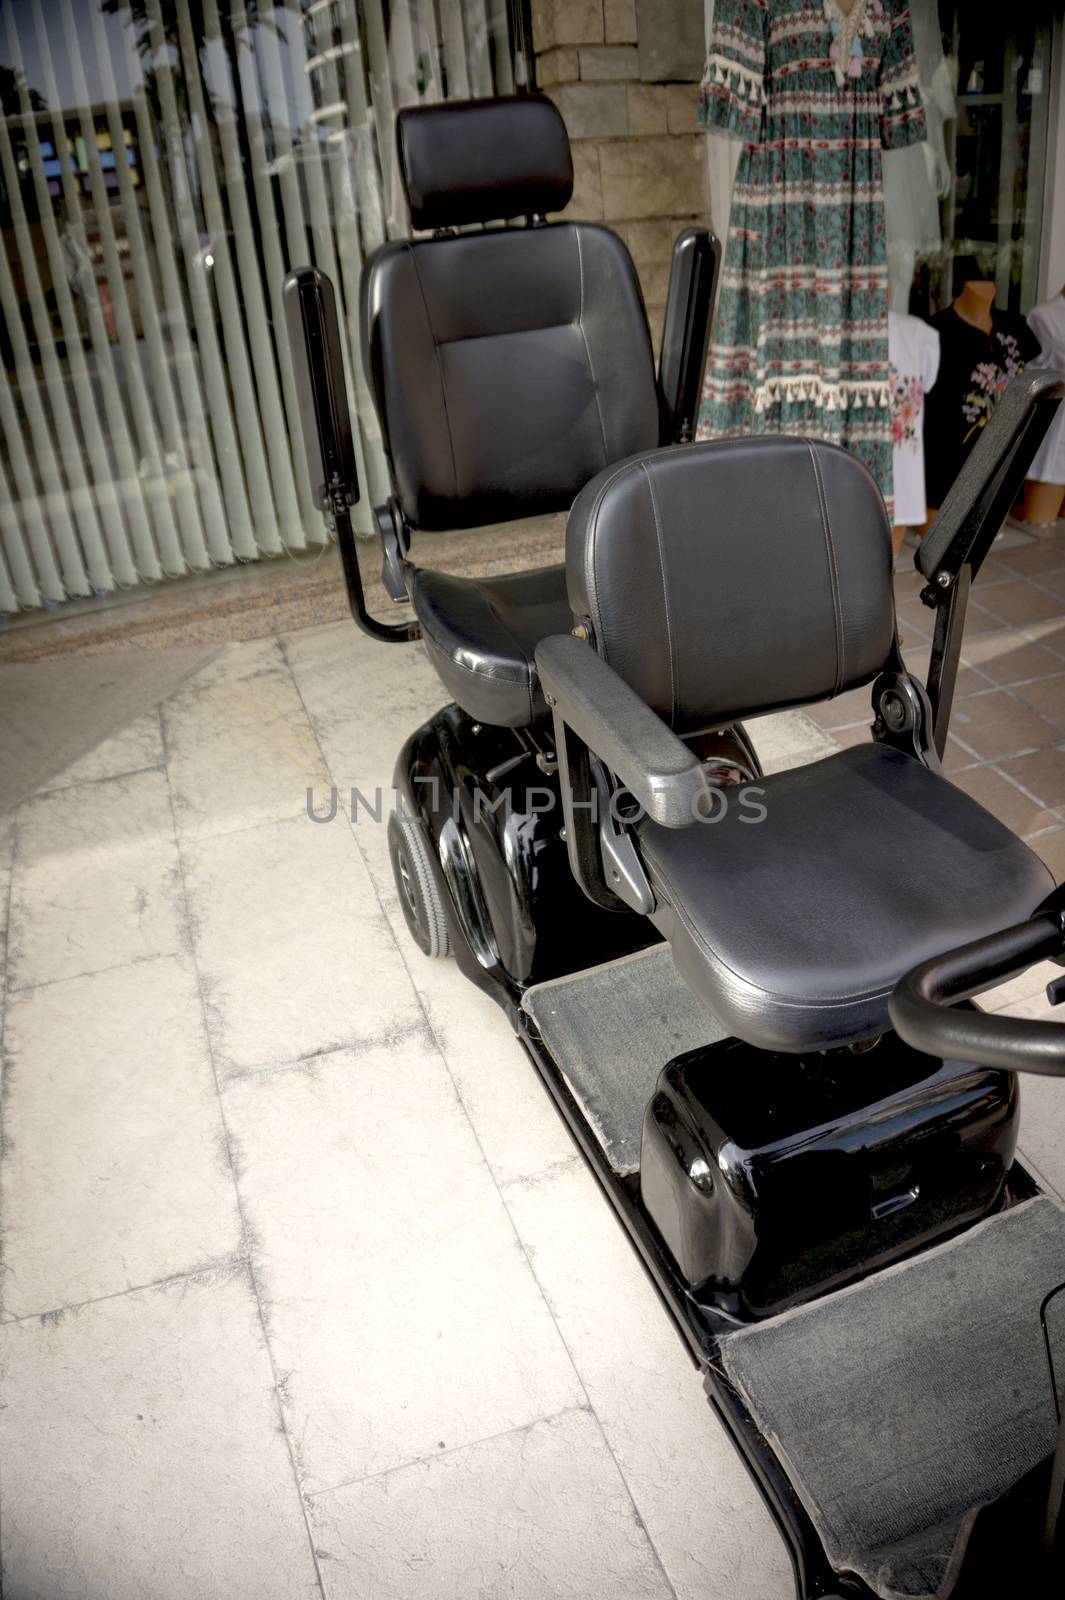 Double seat vehicle for people with disabilities by GemaIbarra